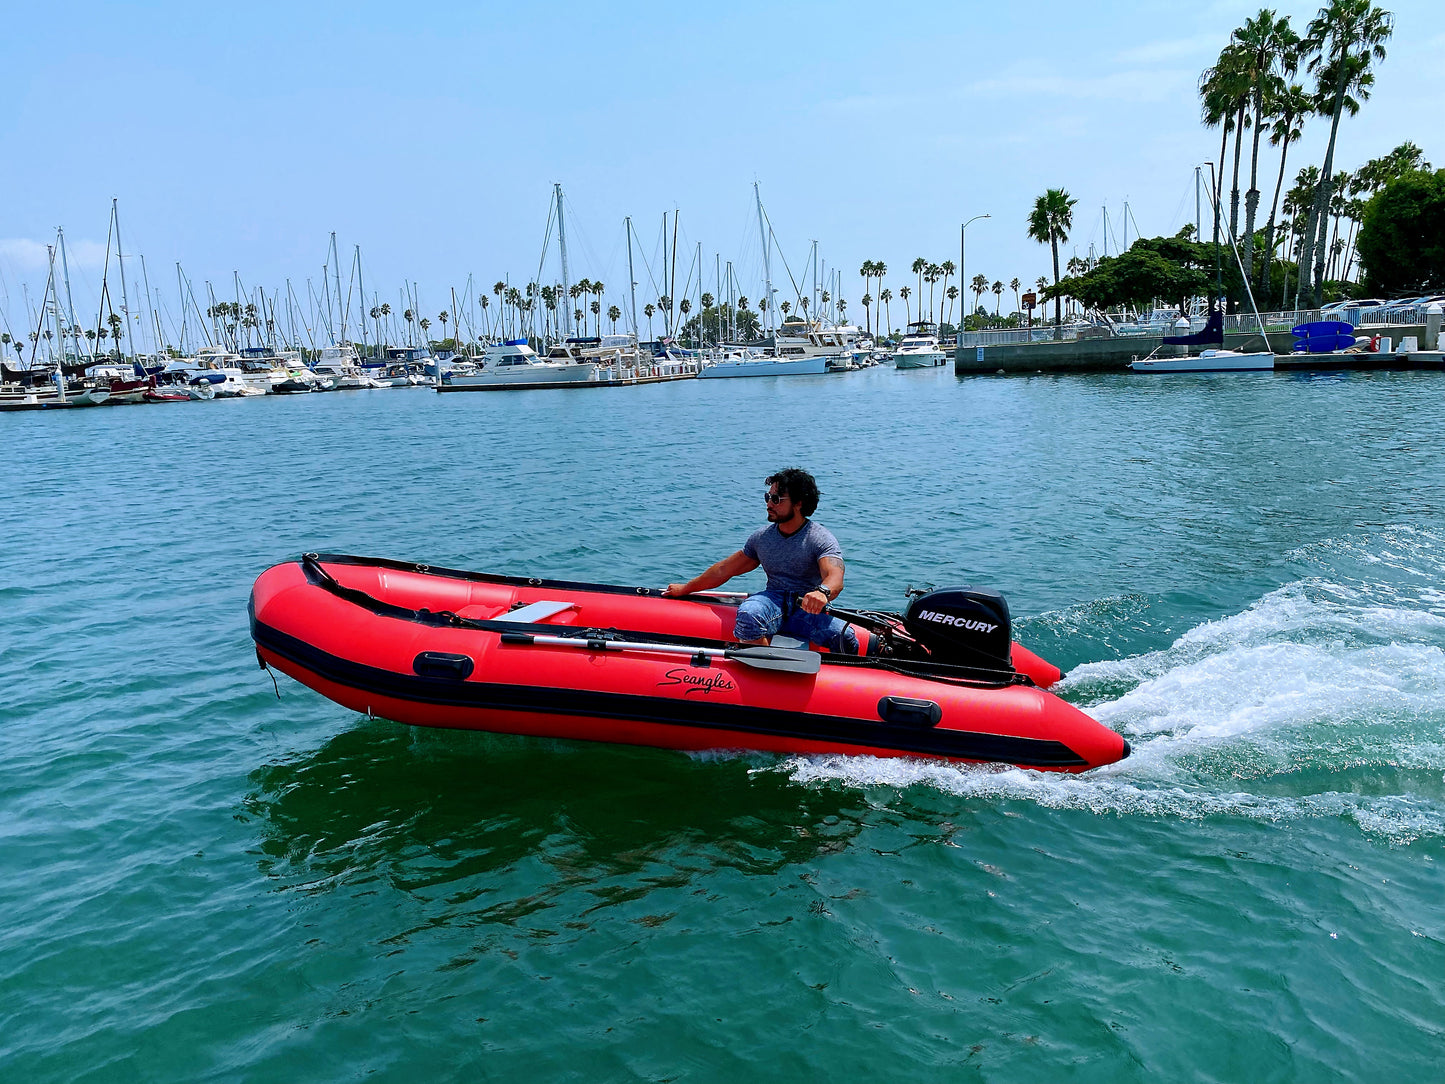 Seangles Inflatable Dinghy Boat with Aluminum Floor and Aluminum Transom - Inflatable Boat for Adults Heavy Duty - USCG Approved